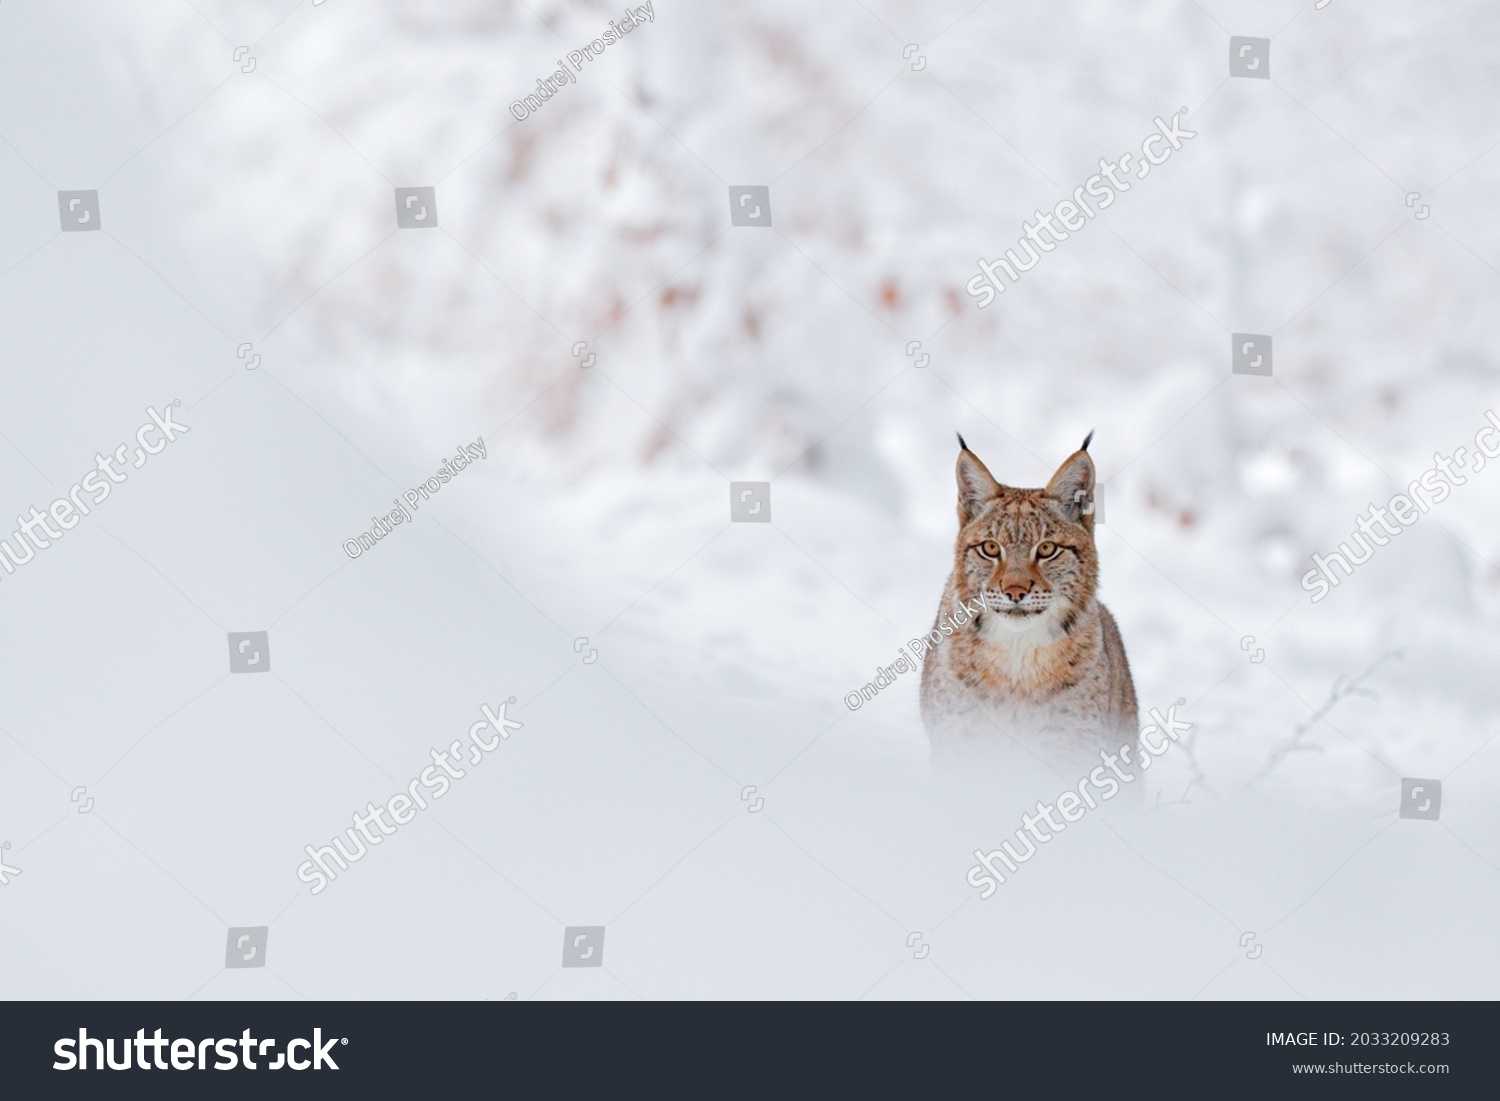 Lynx, winter wildlife. Cute big cat in habitat, cold condition. Snowy forest with beautiful animal wild lynx, Poland. Eurasian Lynx nature running, wild cat in the forest with snow.  #2033209283